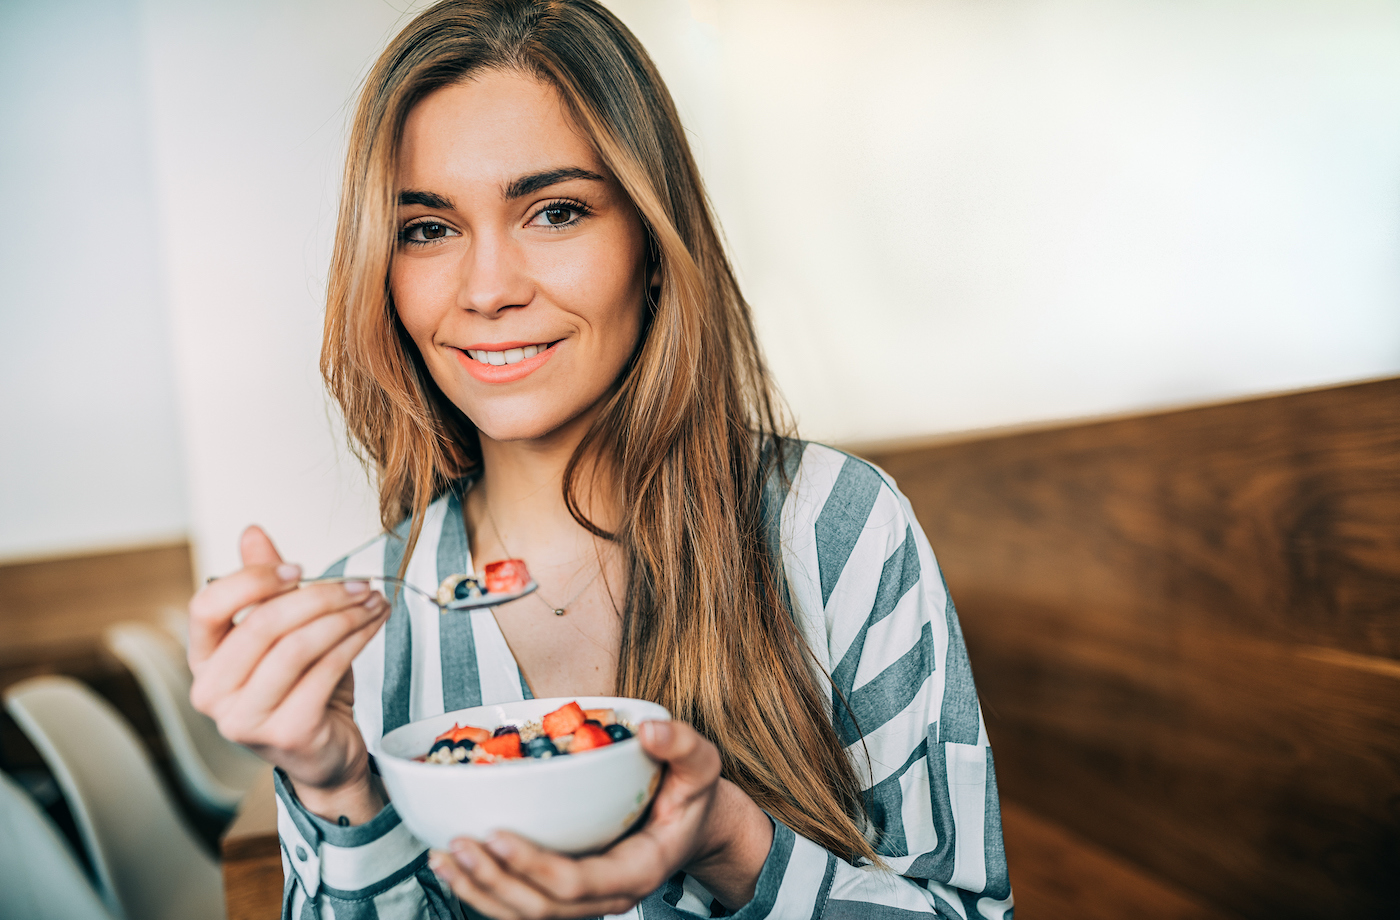 heart healthy snacks woman eating bowl of berries and oats